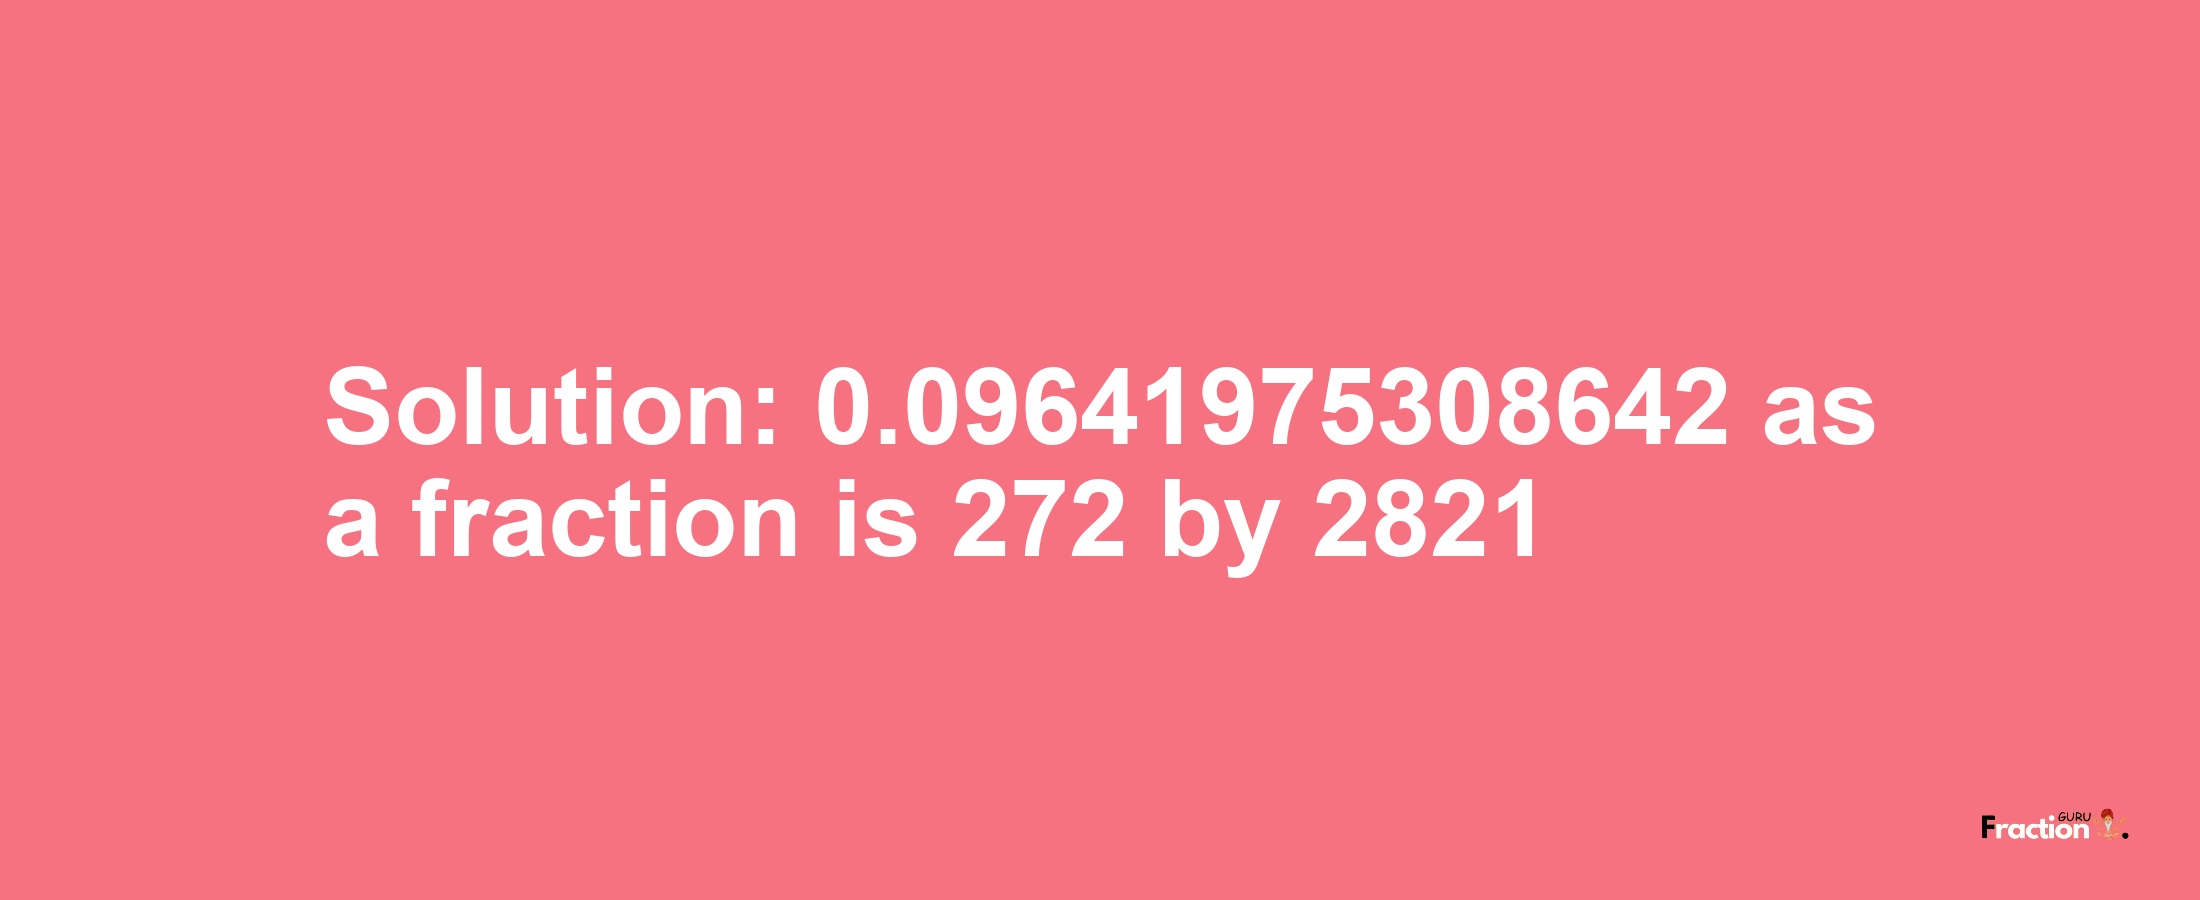 Solution:0.09641975308642 as a fraction is 272/2821